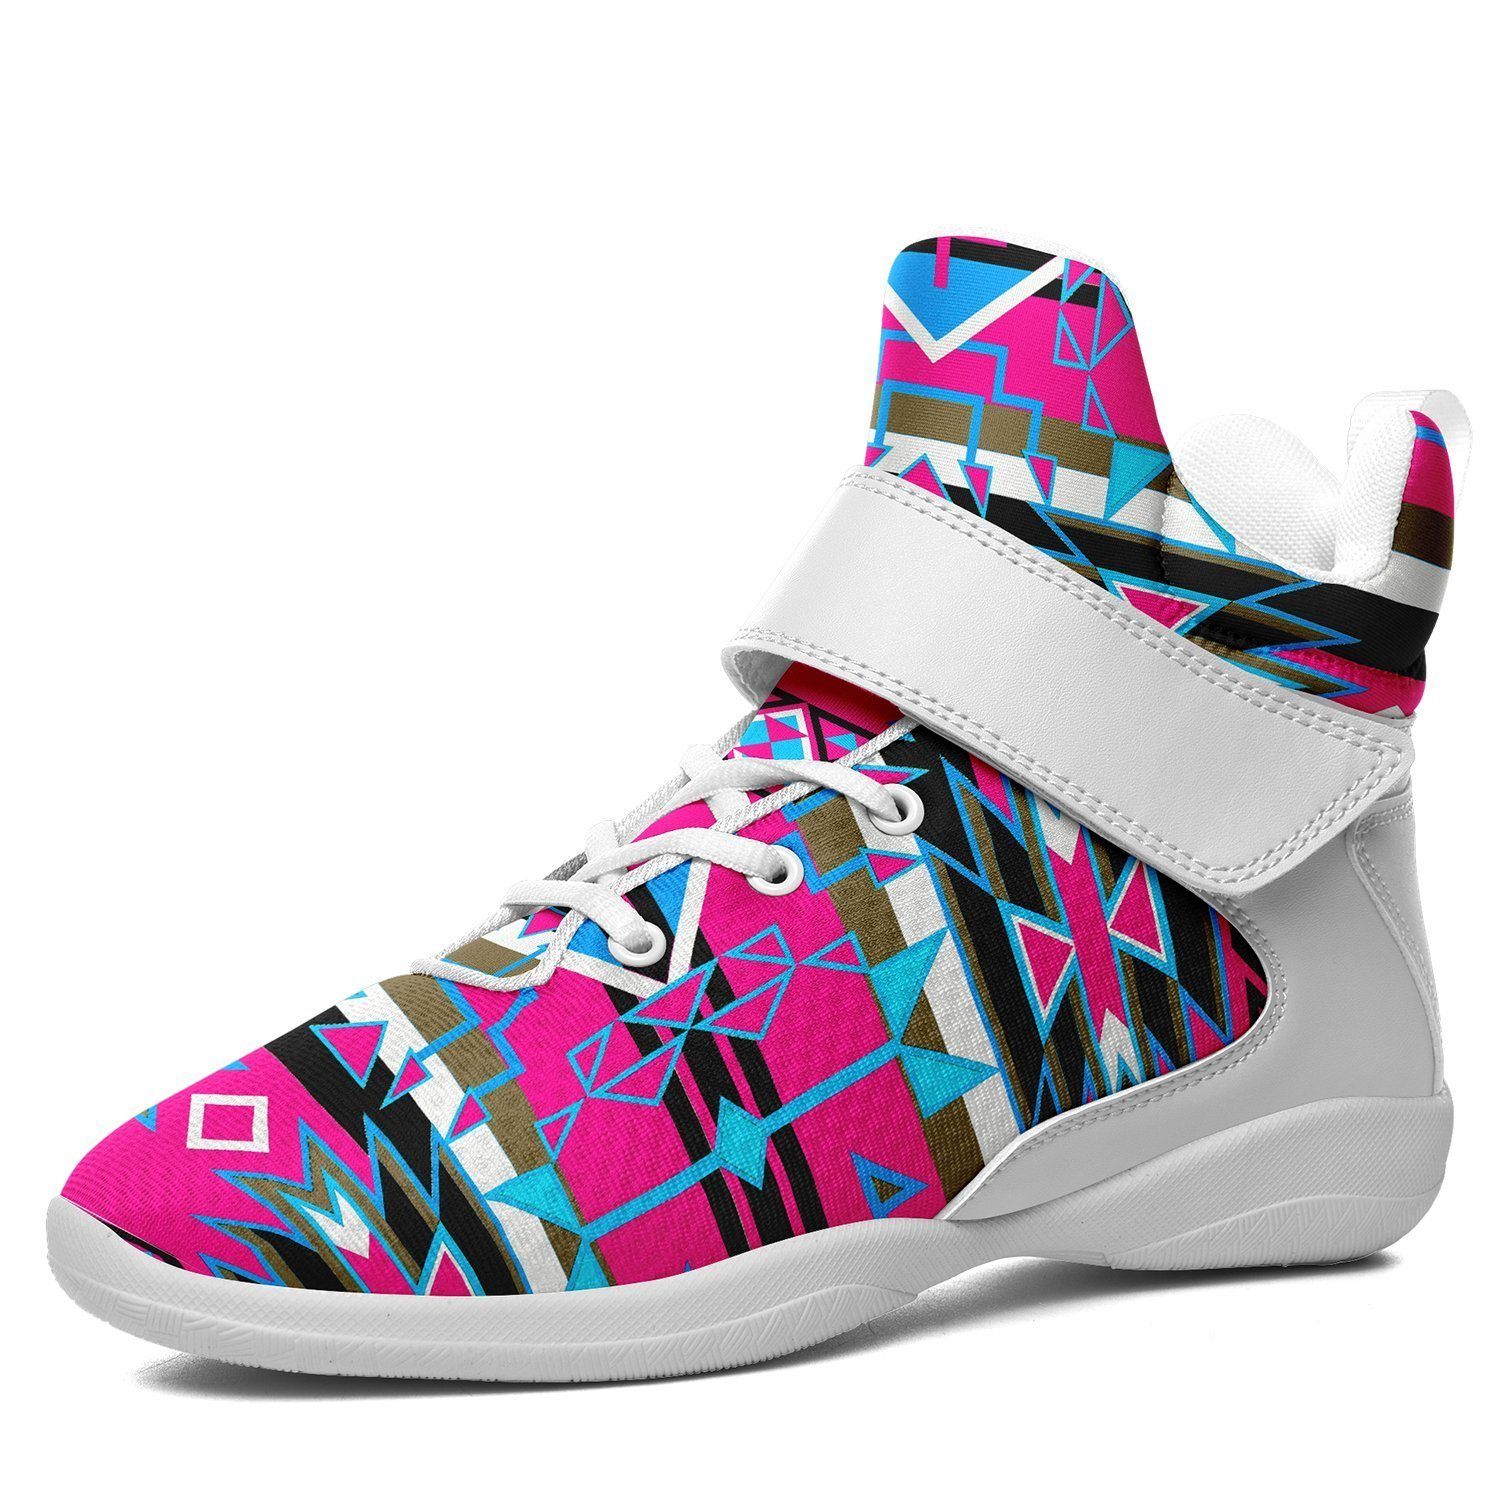 Force of Nature Sunset Storm Ipottaa Basketball / Sport High Top Shoes - White Sole 49 Dzine US Men 7 / EUR 40 White Sole with White Strap 